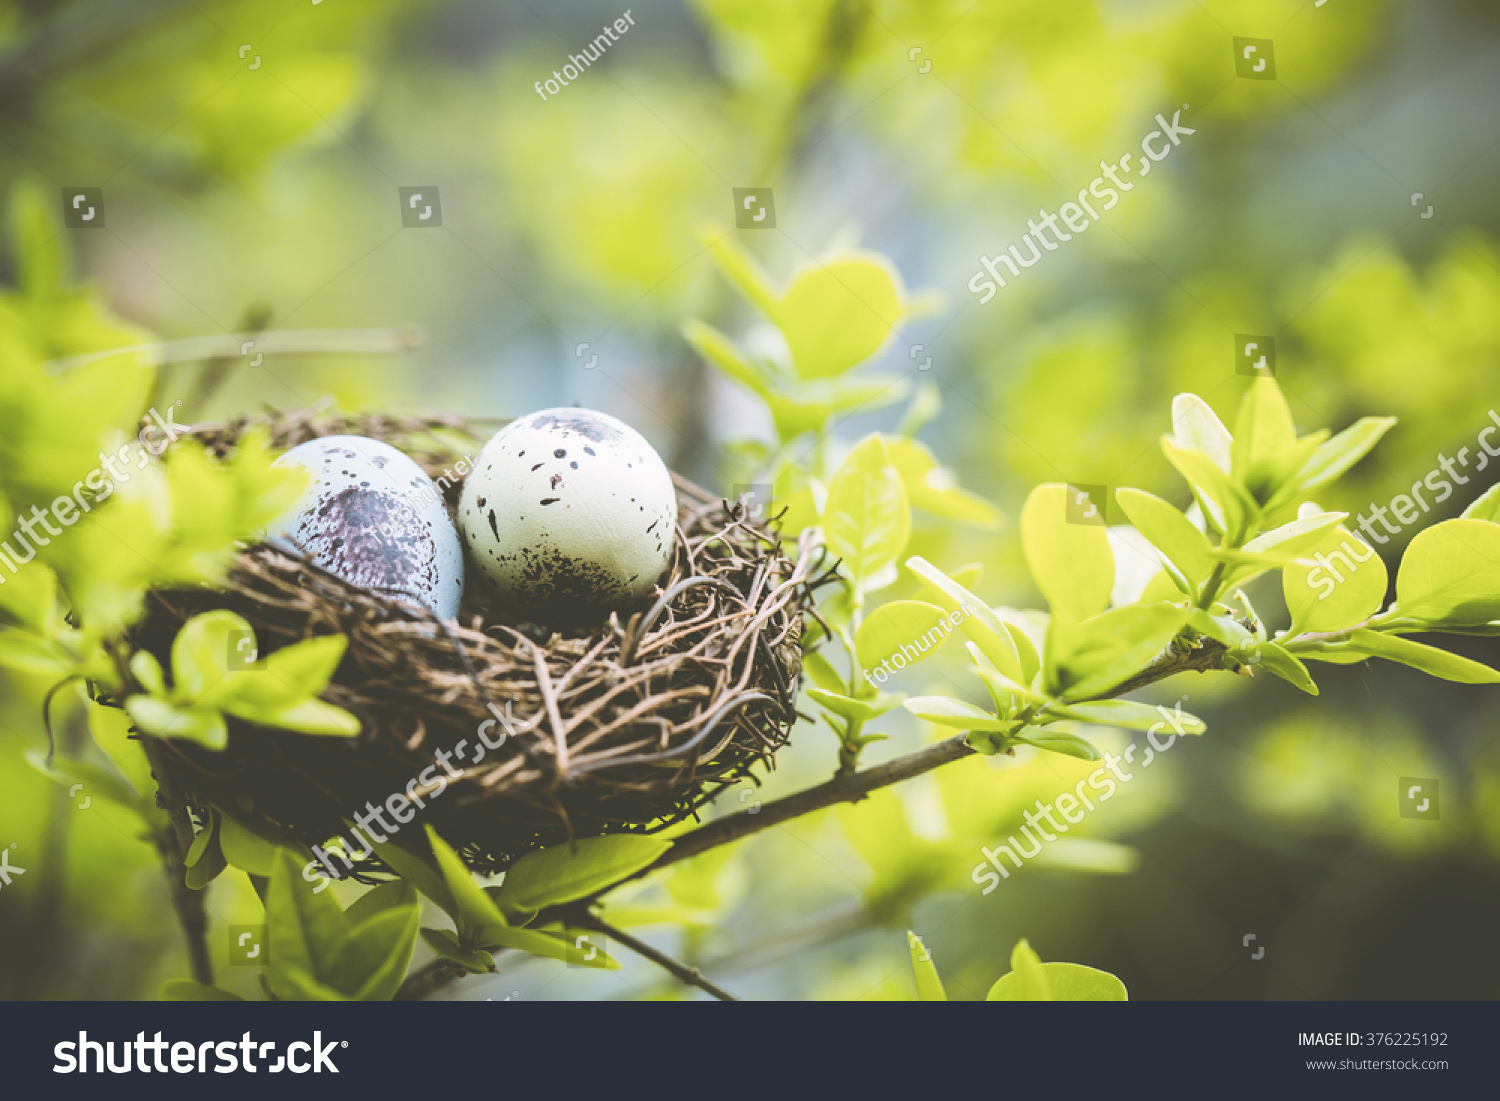 Bird nest on branch with easter eggs for Easter #376225192